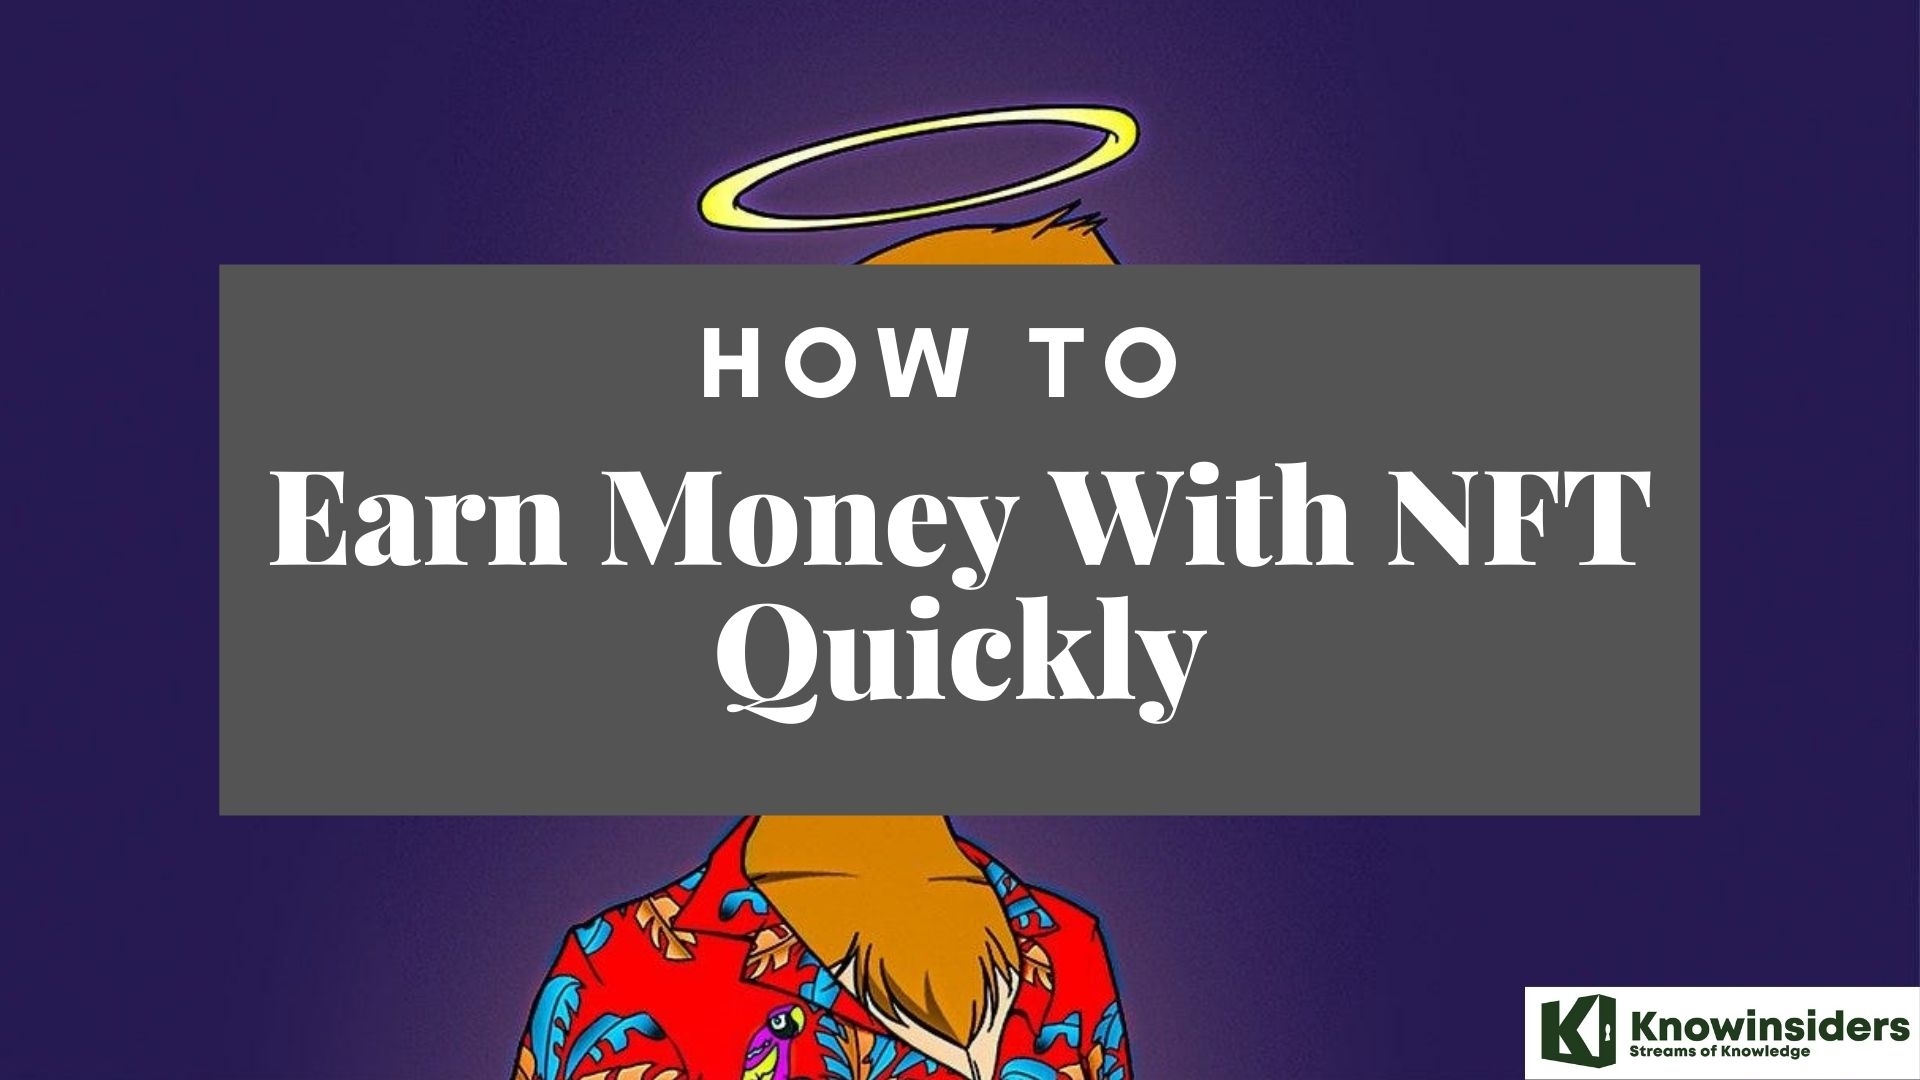 Easy Ways To Earn Money With NFT Quickly in 2022/2023